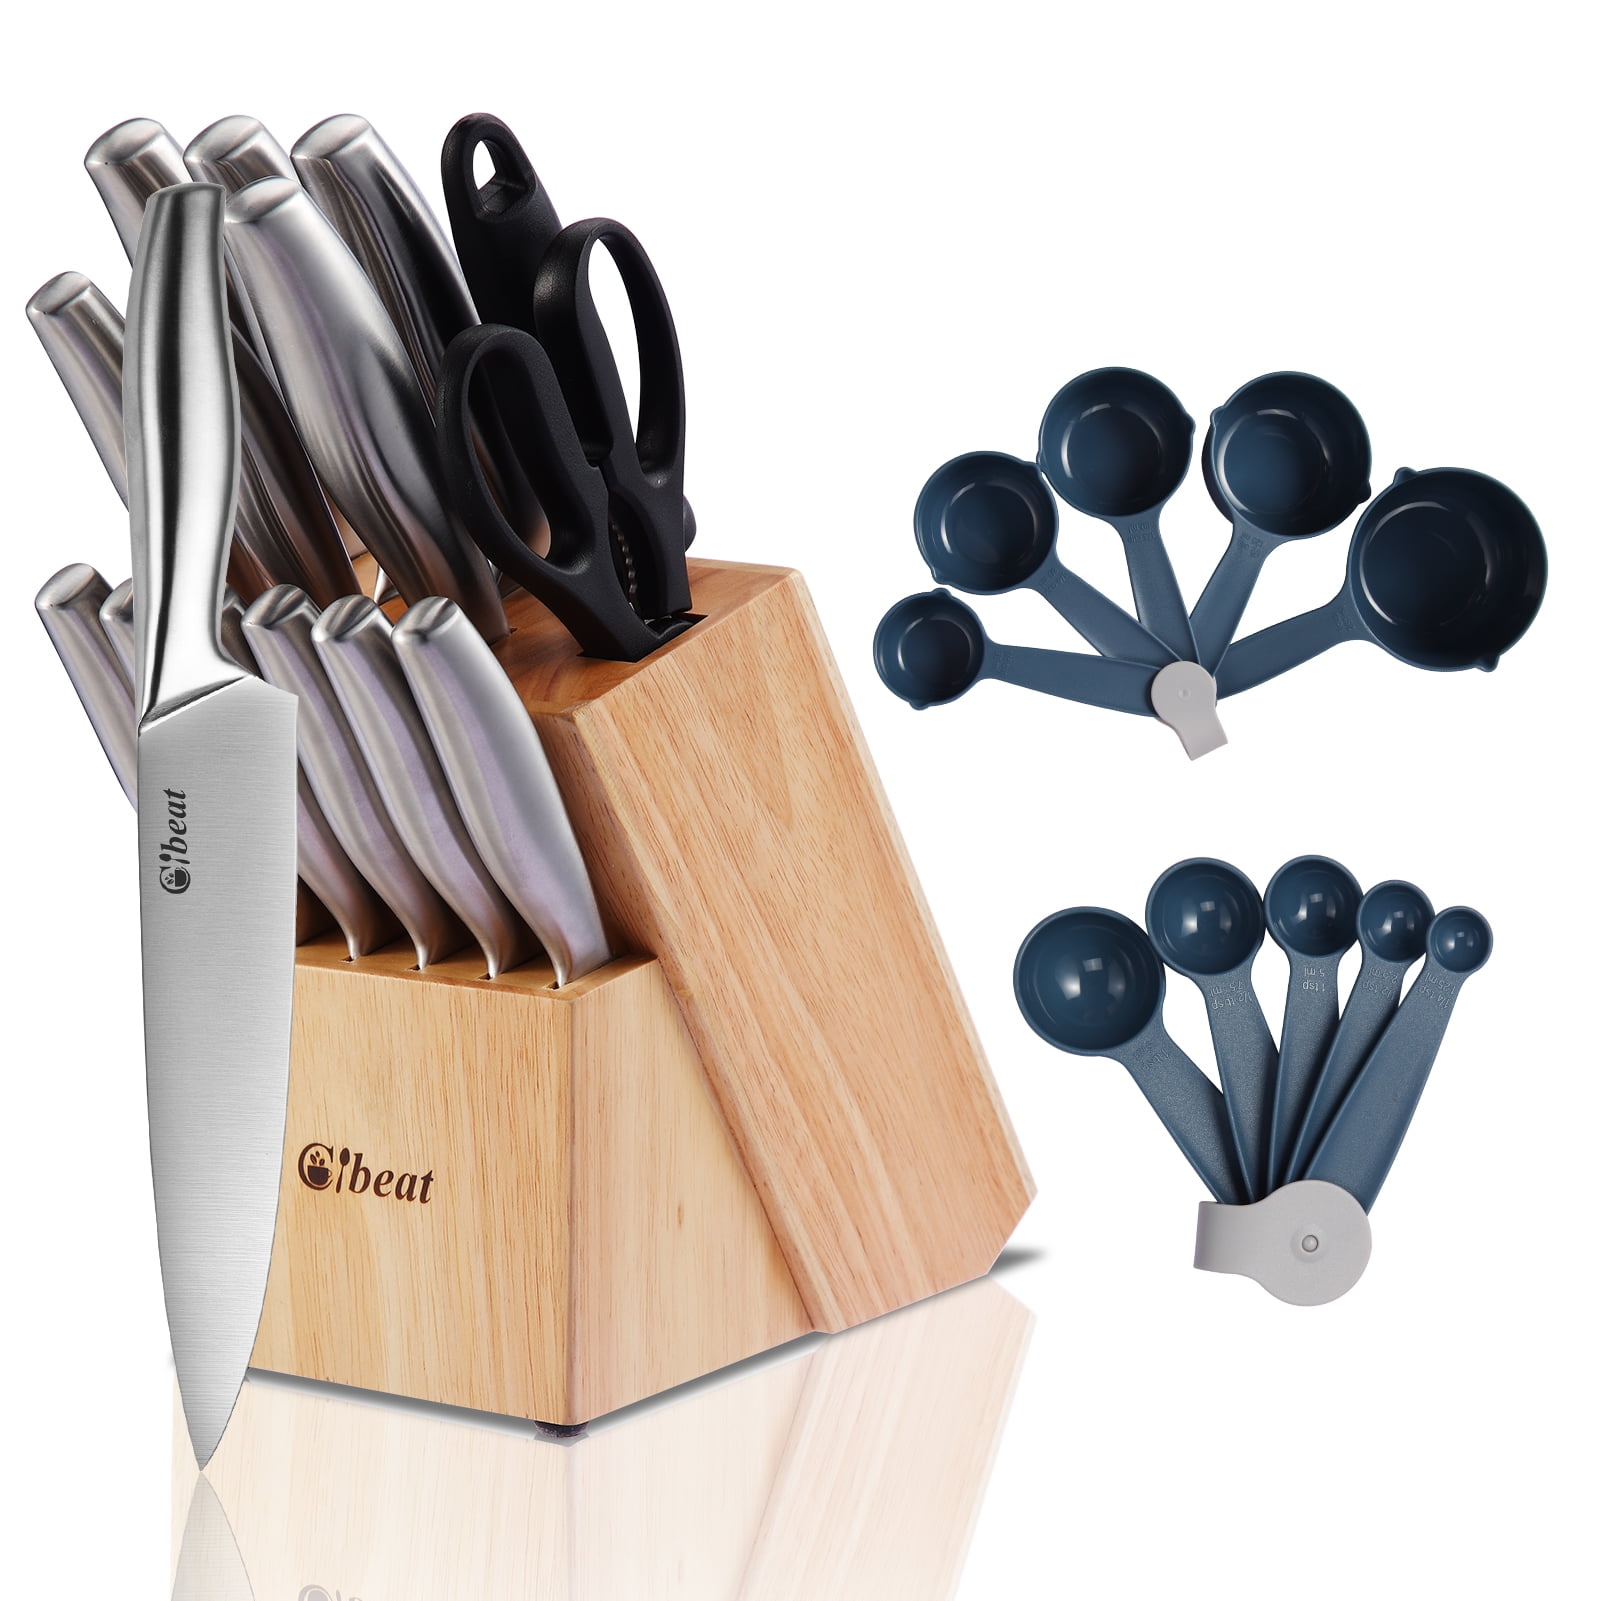 Kitchen Knife Set with Wooden Block, 17-Piece Modern Design High Carbon  Stainless Steel, Ultra Sharp Knife for Slicing, Cutting, Chopping